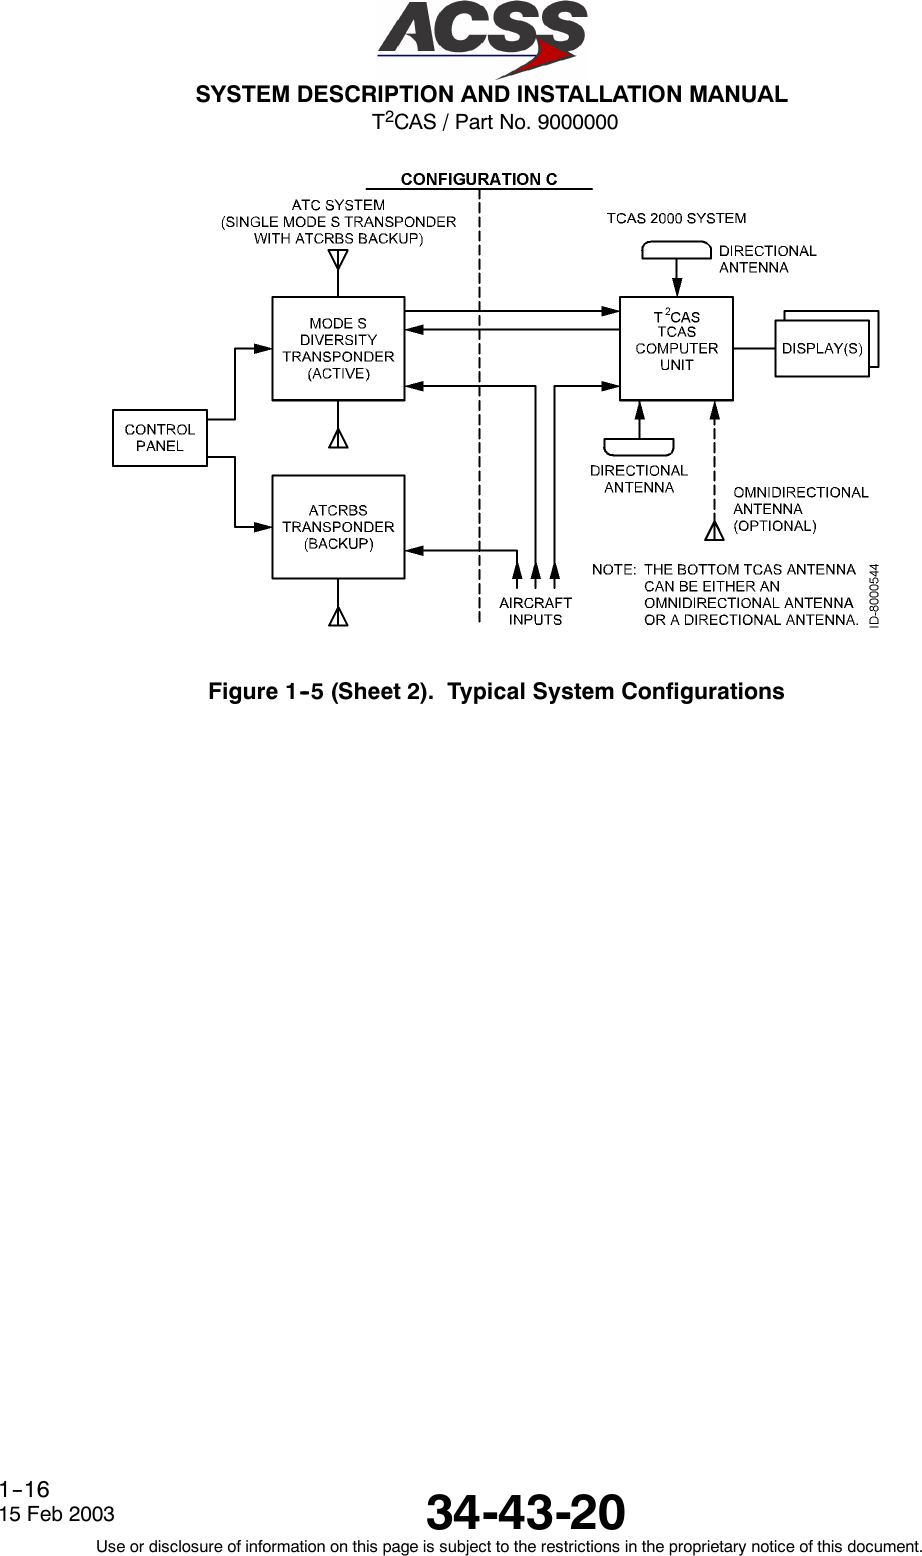 T2CAS / Part No. 9000000SYSTEM DESCRIPTION AND INSTALLATION MANUAL34-43-2015 Feb 2003Use or disclosure of information on this page is subject to the restrictions in the proprietary notice of this document.1--16Figure 1--5 (Sheet 2). Typical System Configurations